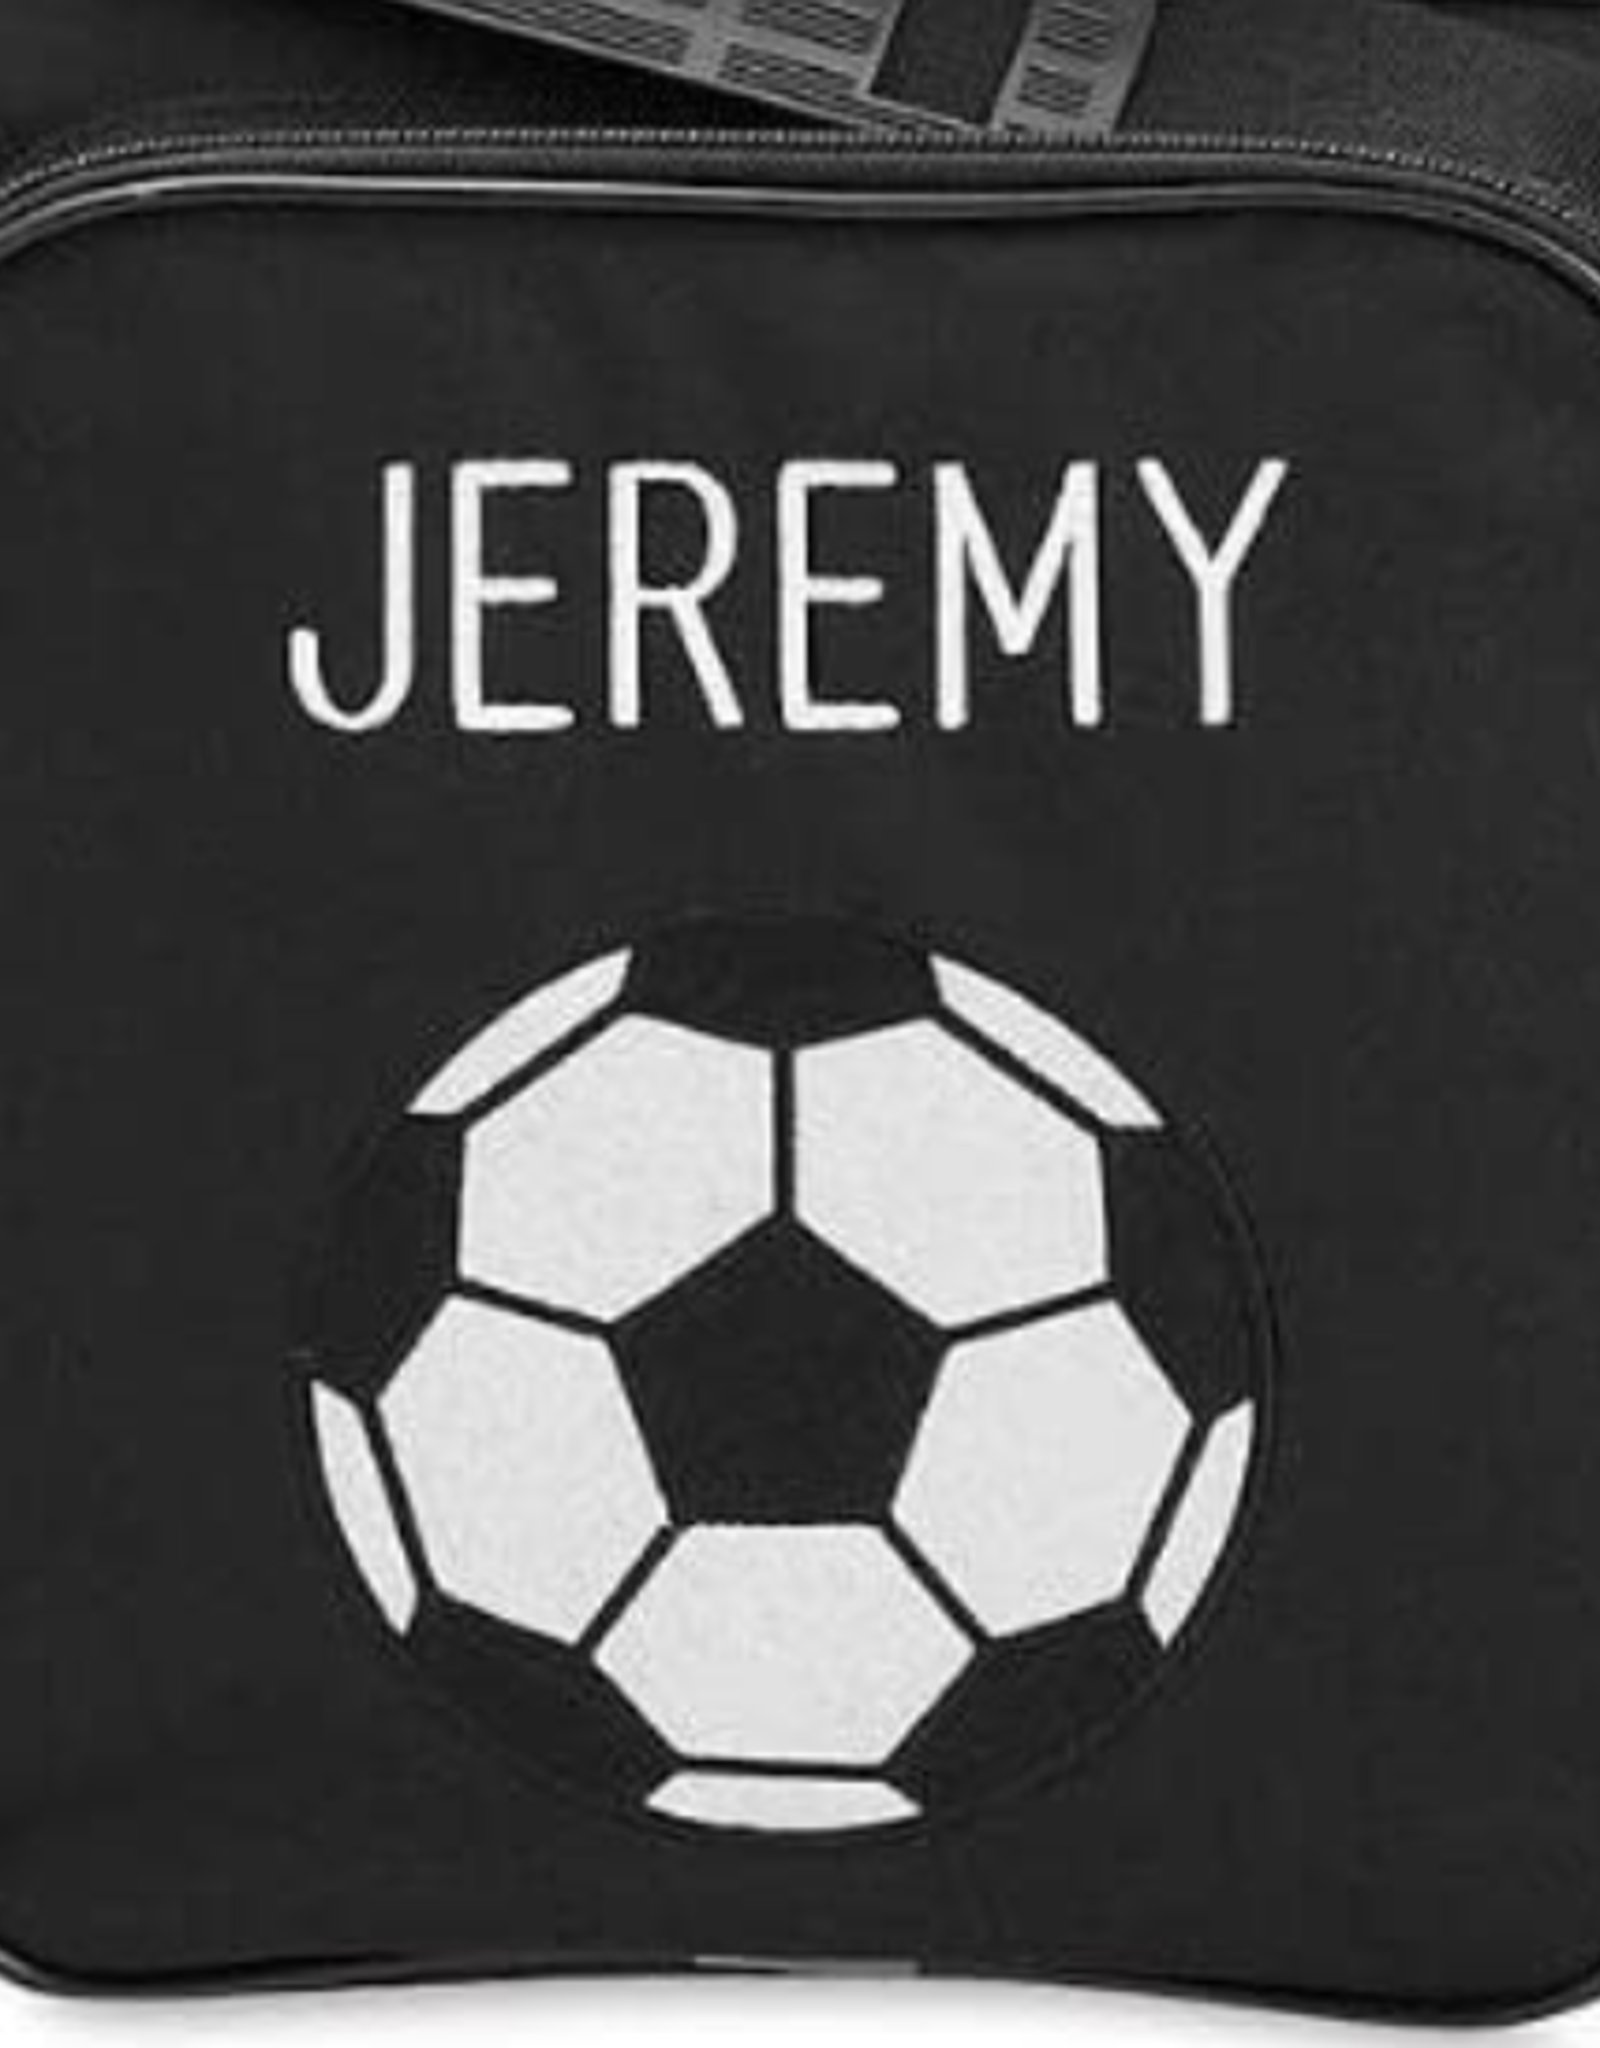 Soccer Bag Embroidery